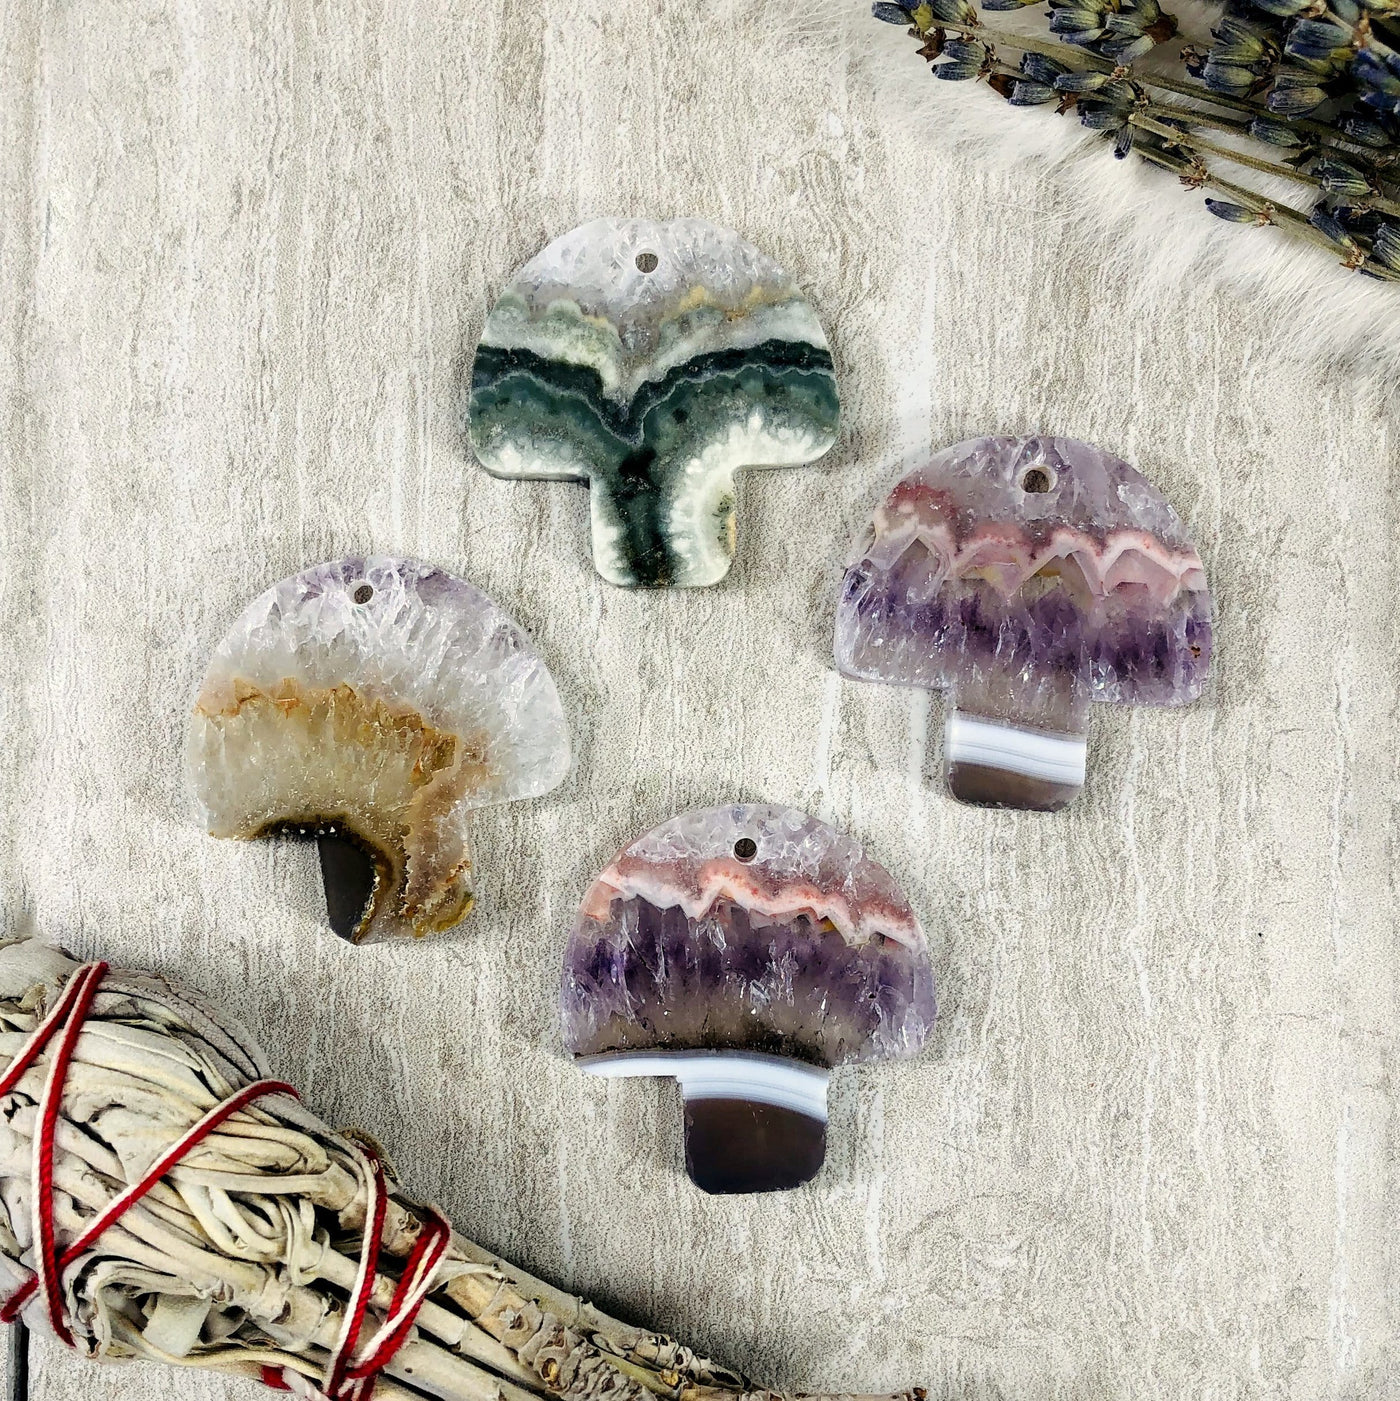 Four Amethyst Mushroom Shaped Large Cabochon and Pendant in different colors to show variety 